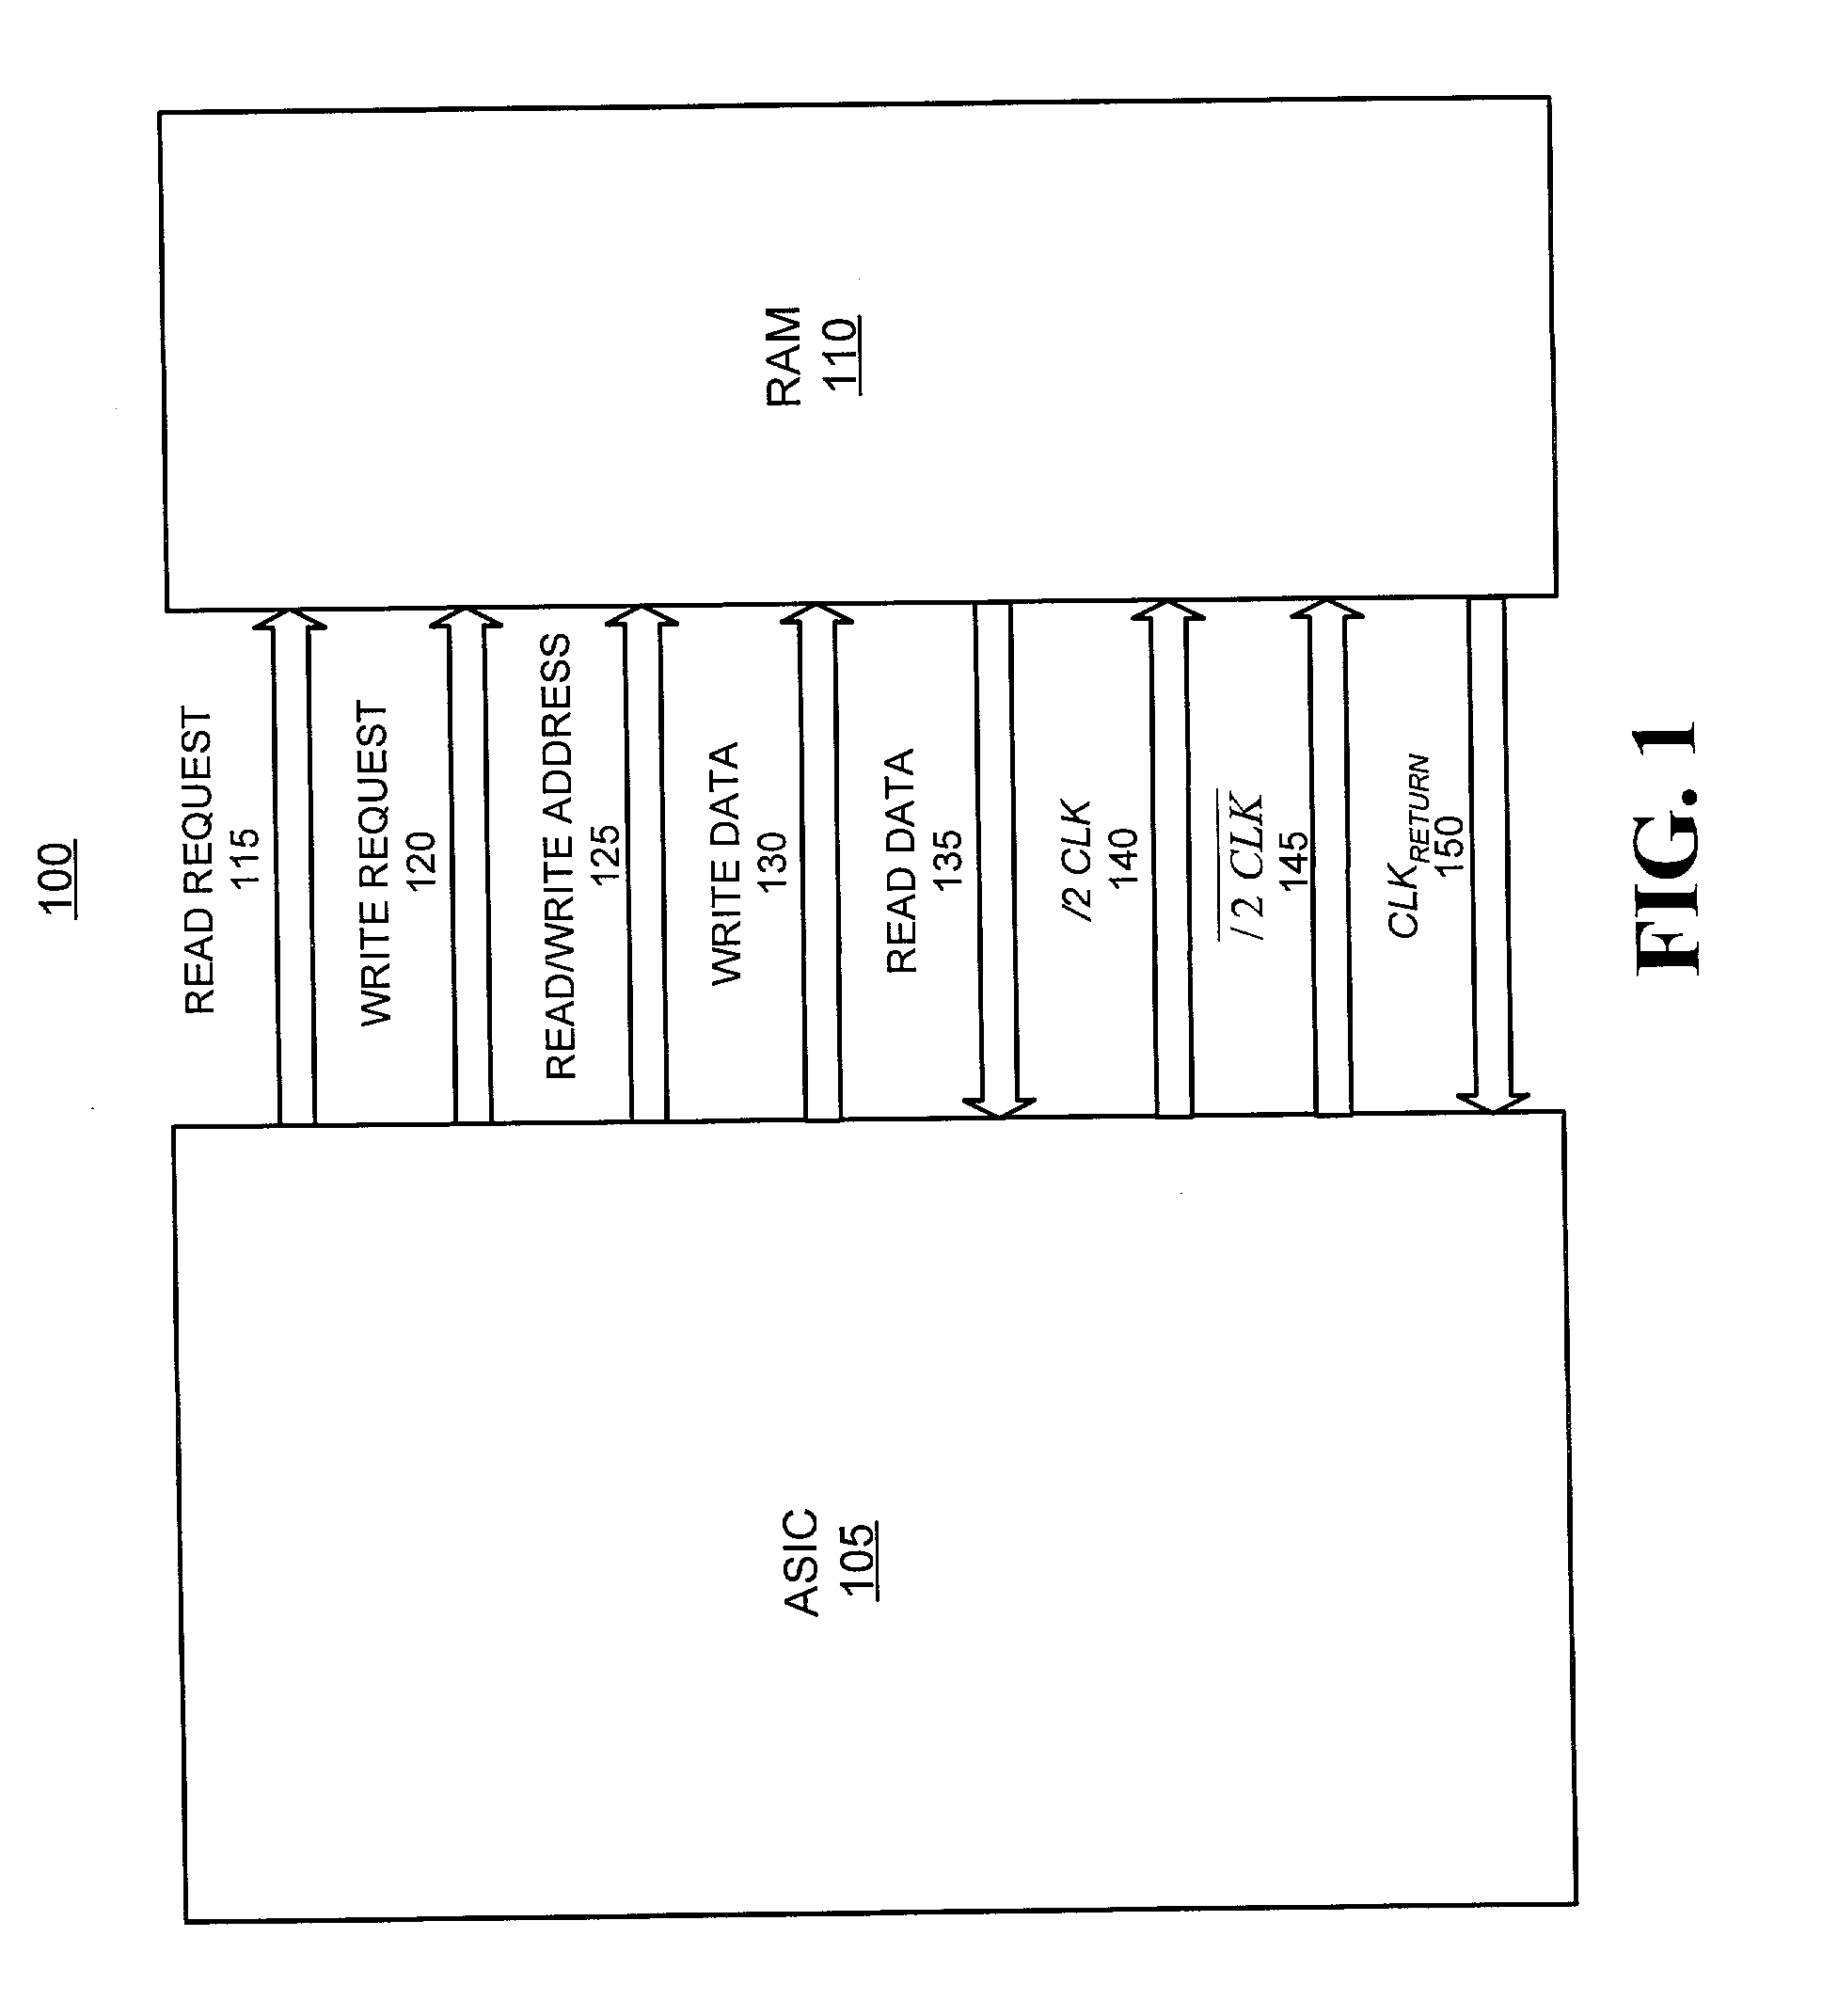 Systems and methods for memory read response latency detection